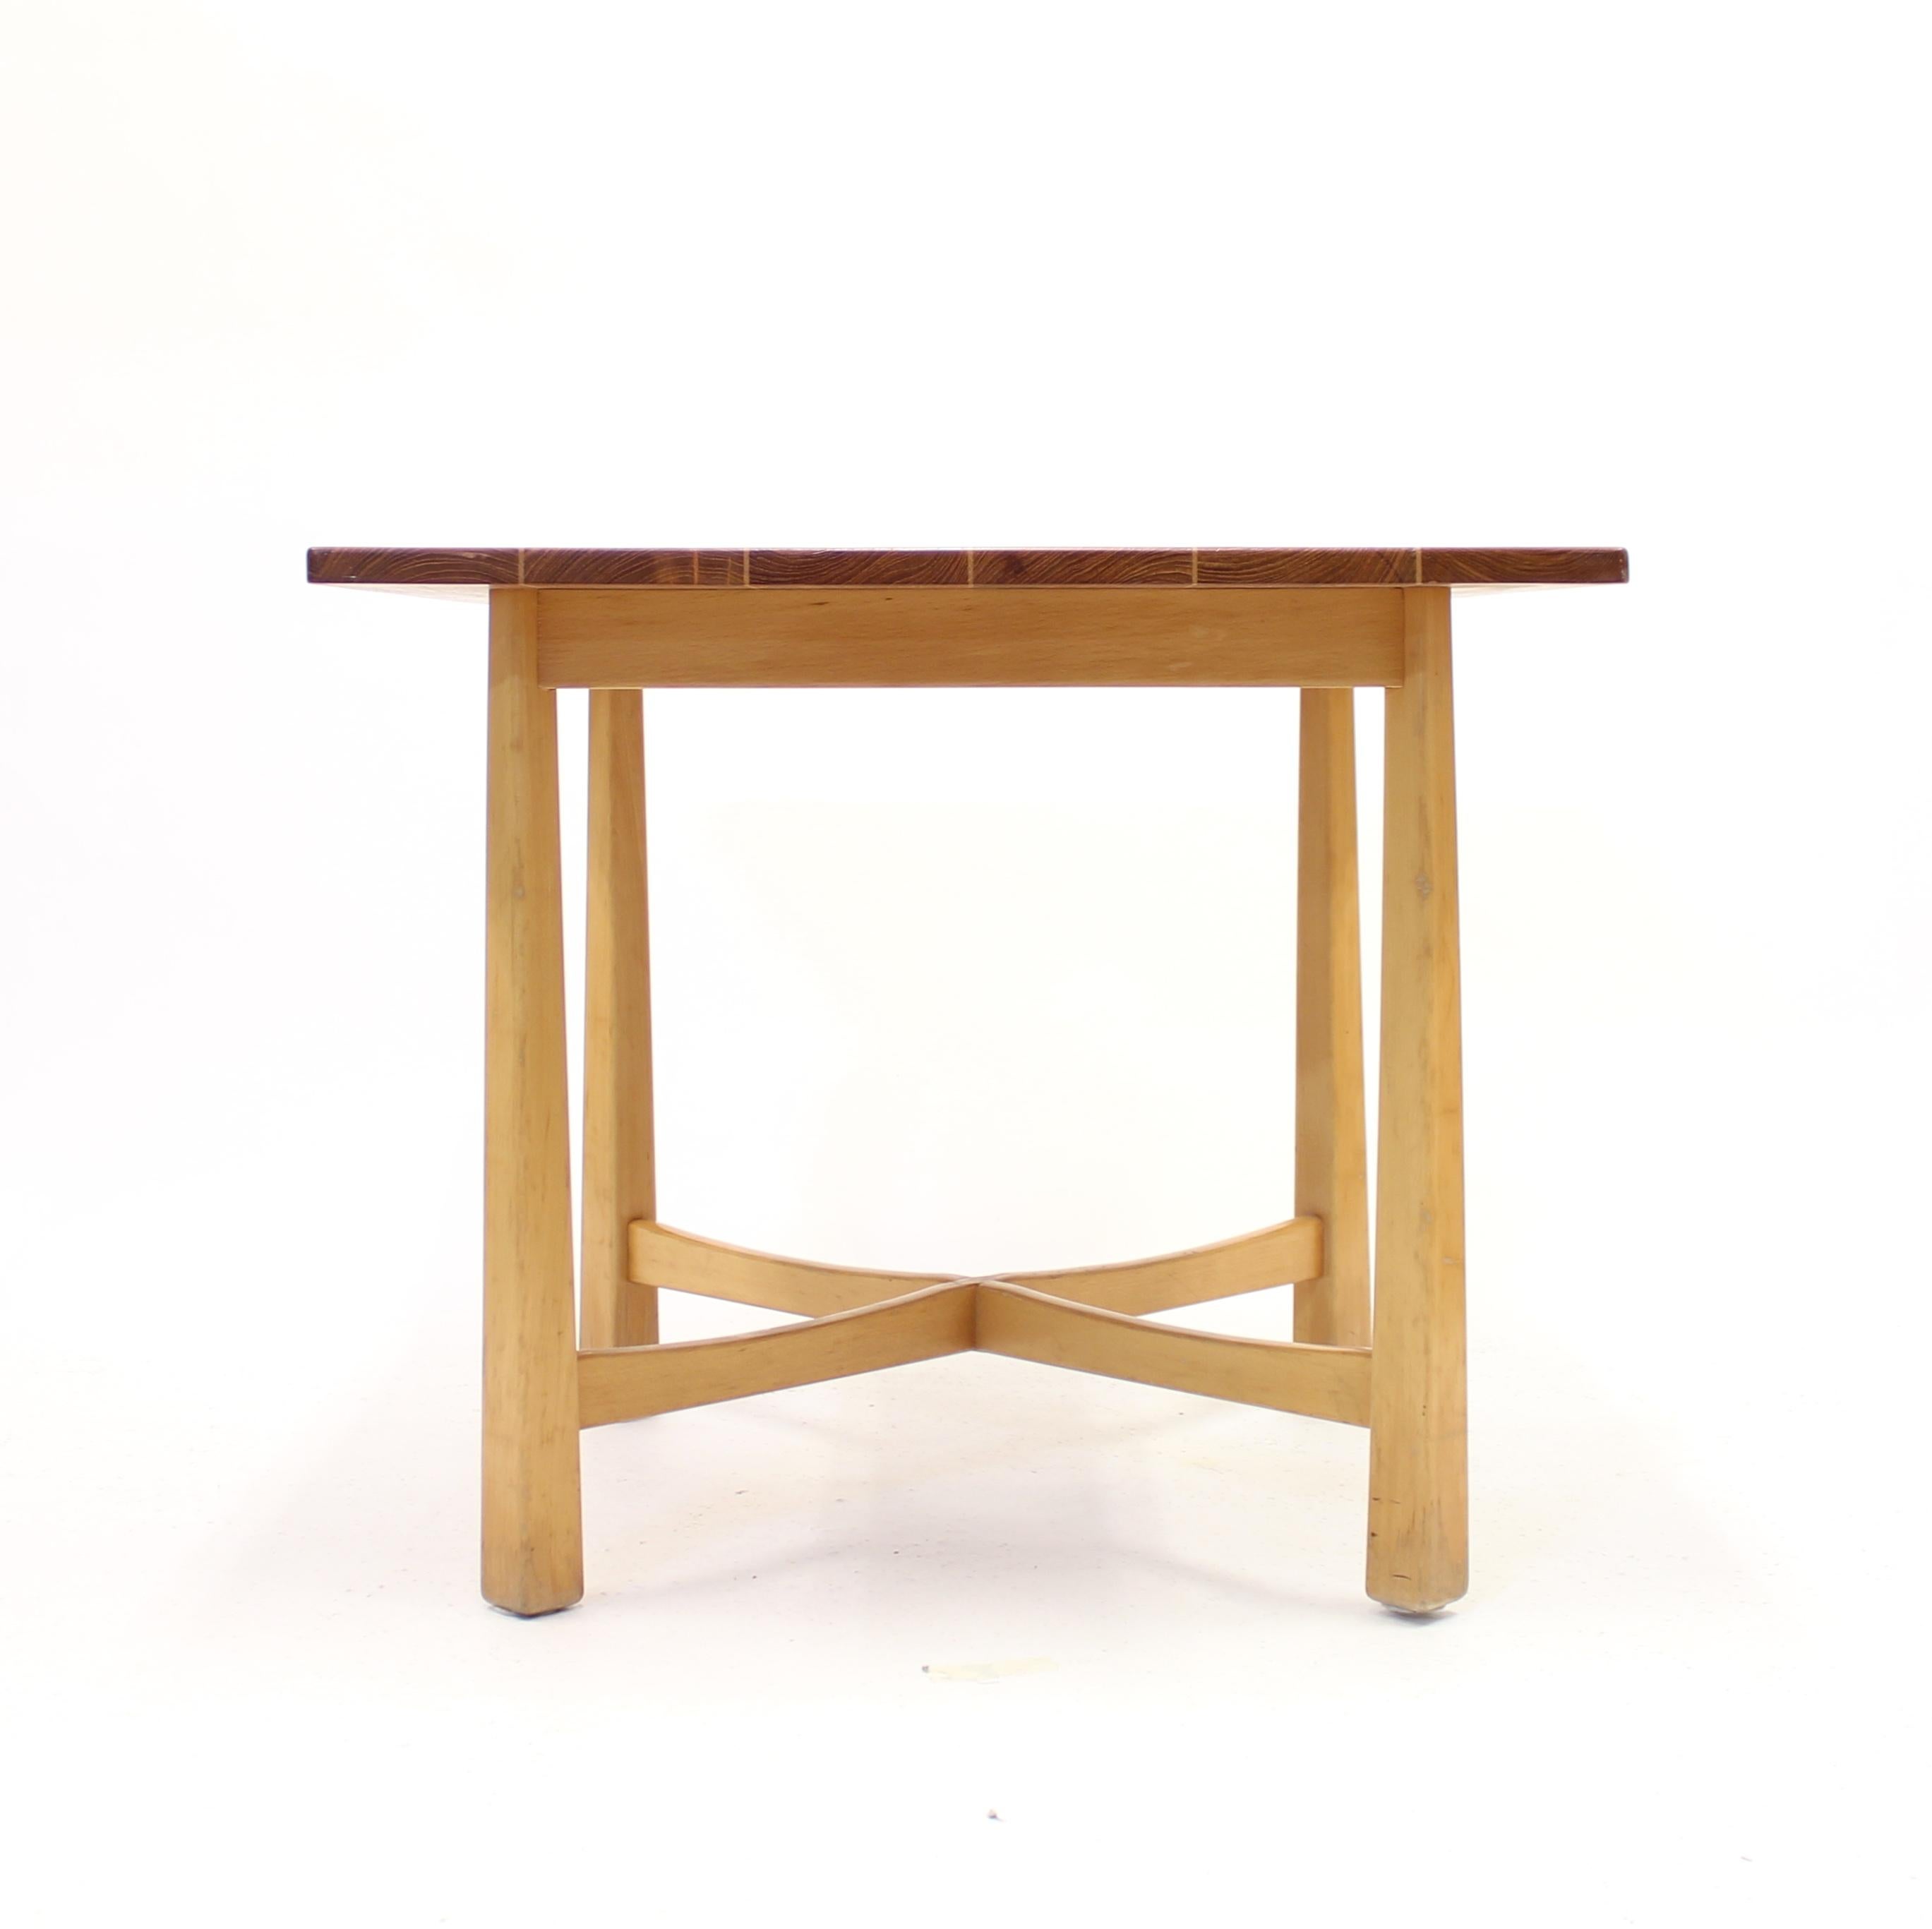 Swedish Modern Teak and Birch Table, Mid-20th Century For Sale 1